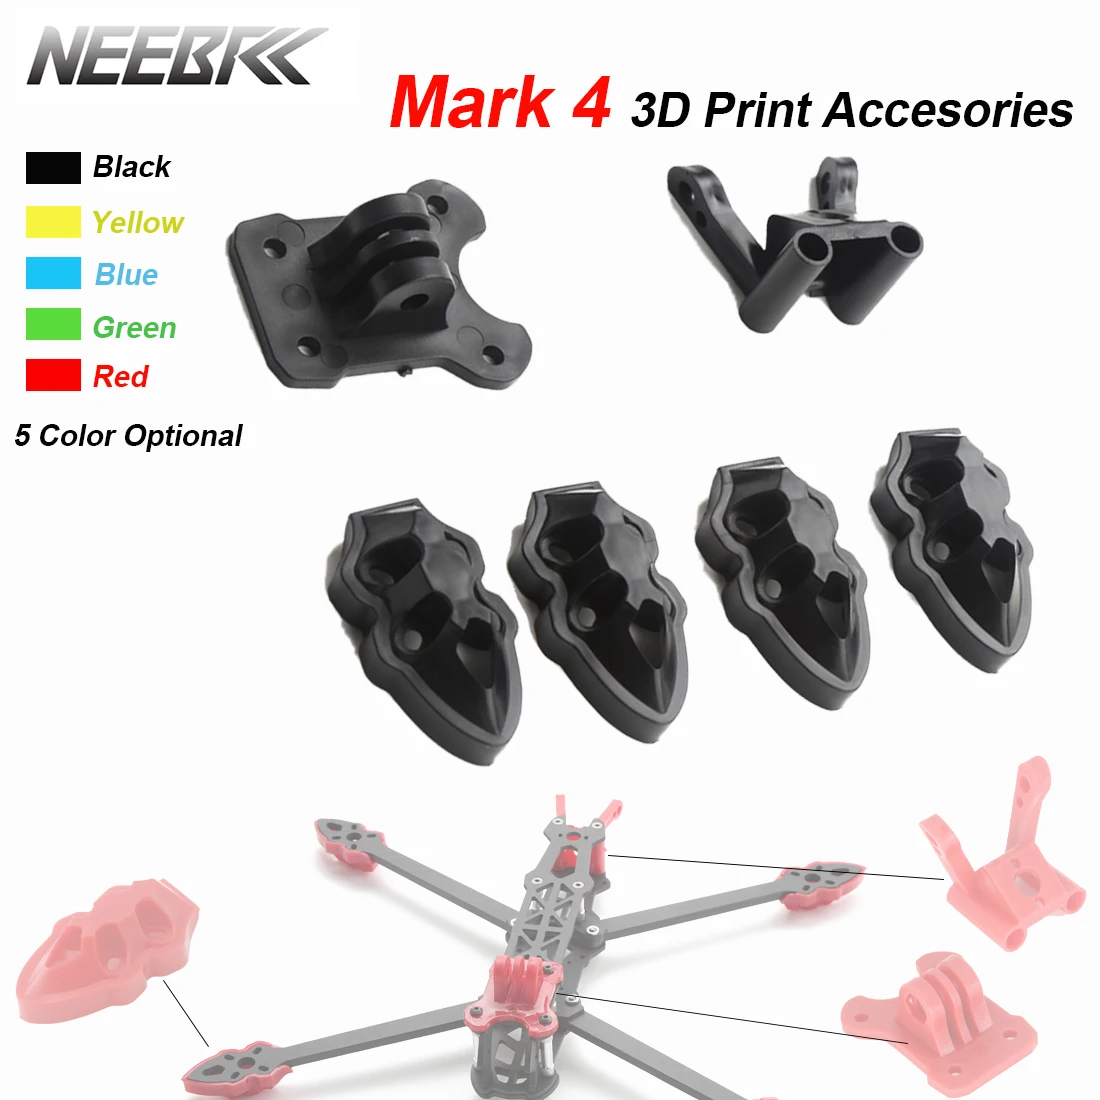 Neebrc RC Quadcopter FPV Drone 3D printed Printing Accessories Antenna/Camera mount Arm Protective Seat Parts for Mark4 frame